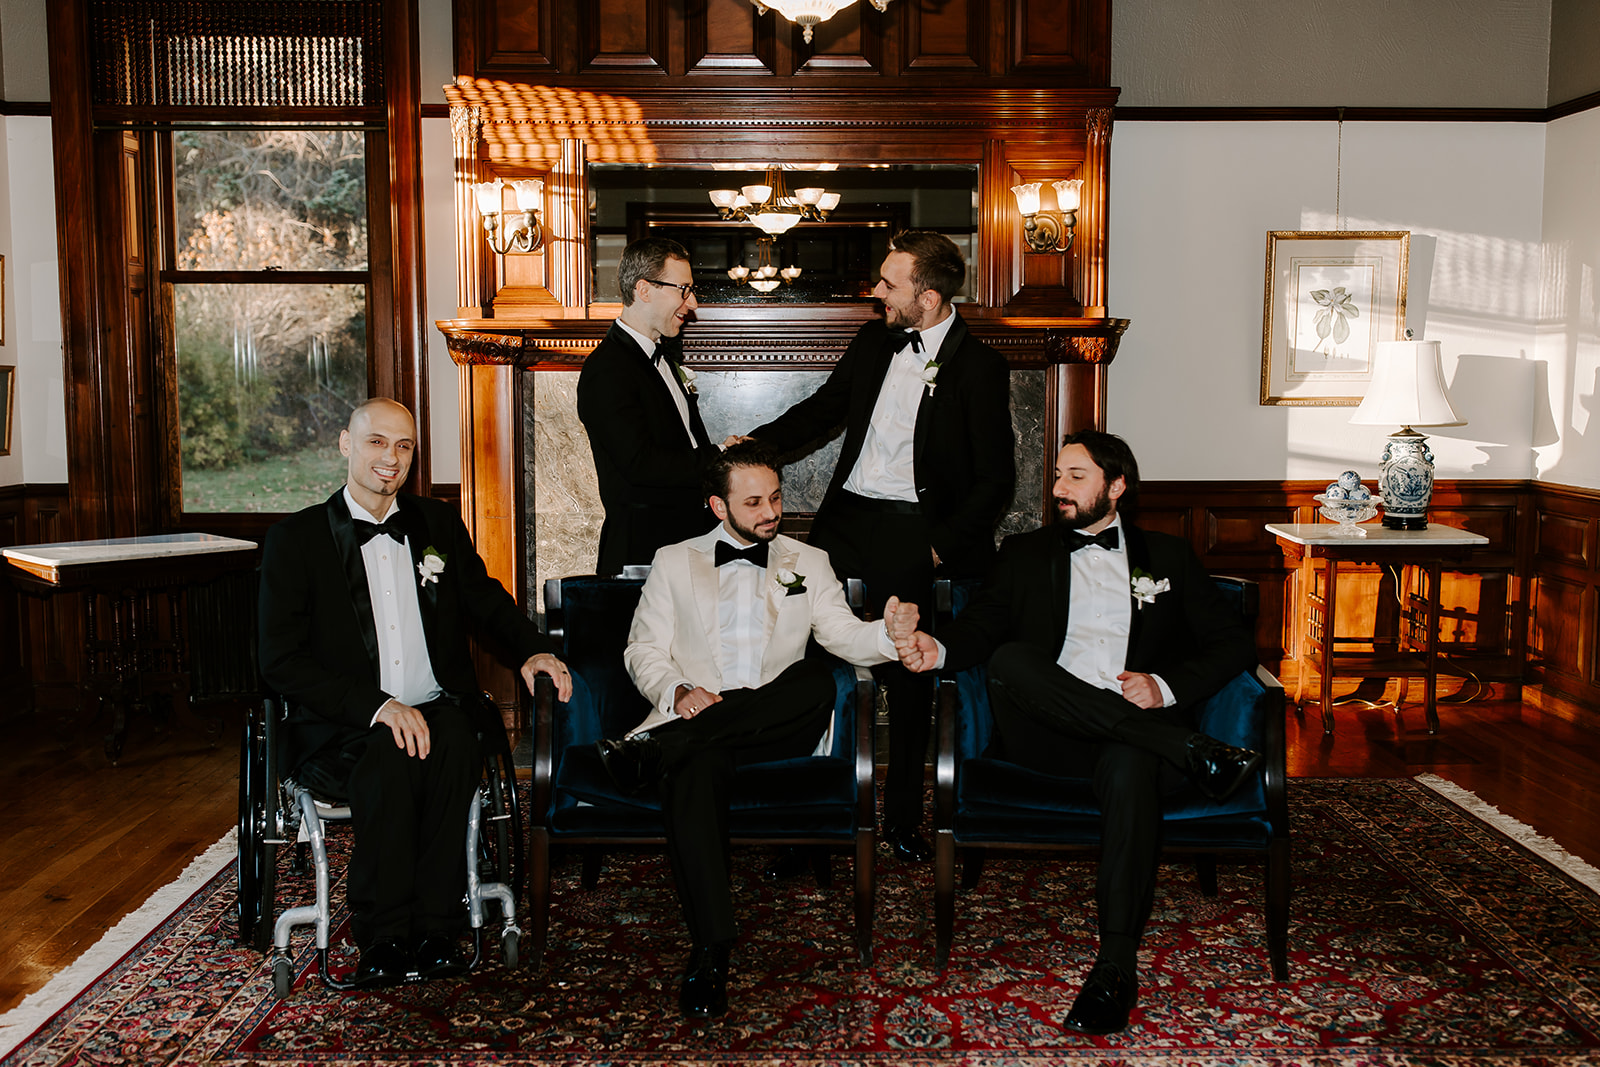 Groomsmen pose together before the dreamy wedding day